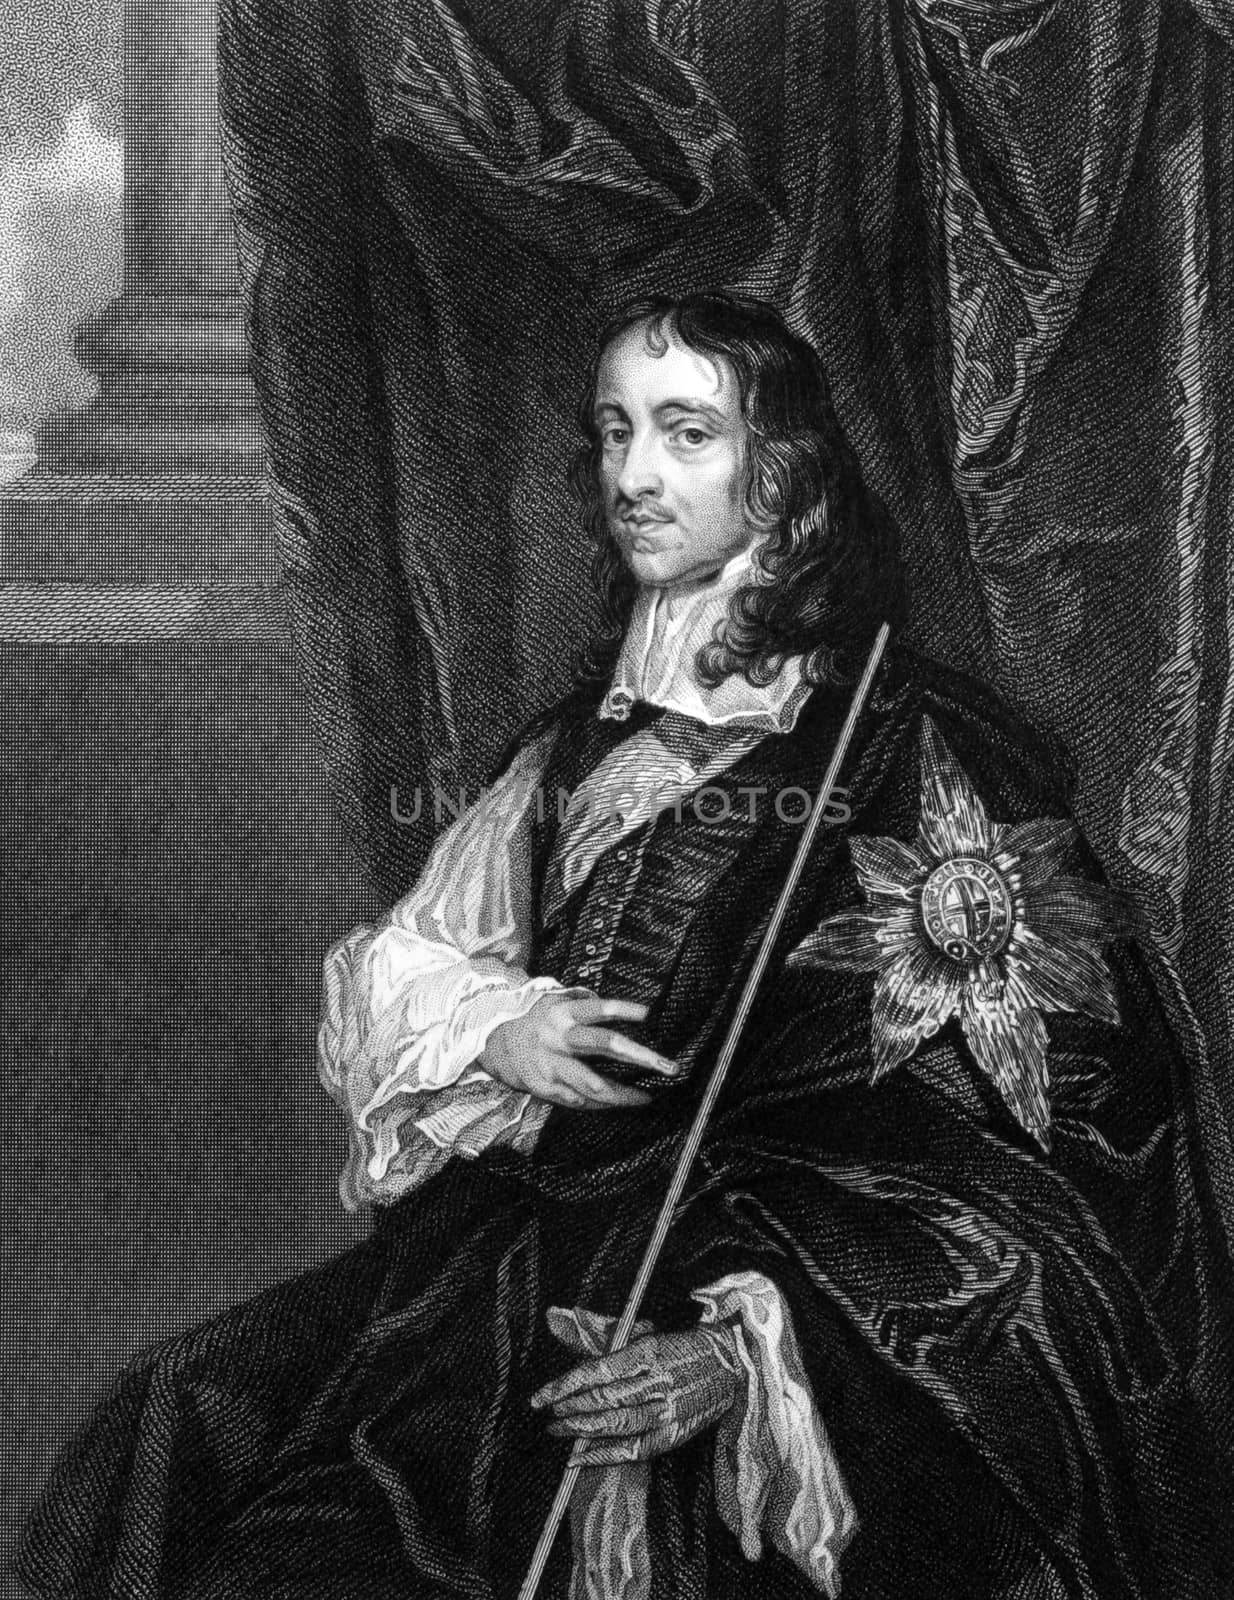 Thomas Wriothesley, 4th Earl of Southampton (1607-1667) on engraving from 1827. English statesman. Engraved by T.Wright and published in ''Portraits of Illustrious Personages of Great Britain'',UK,1827.